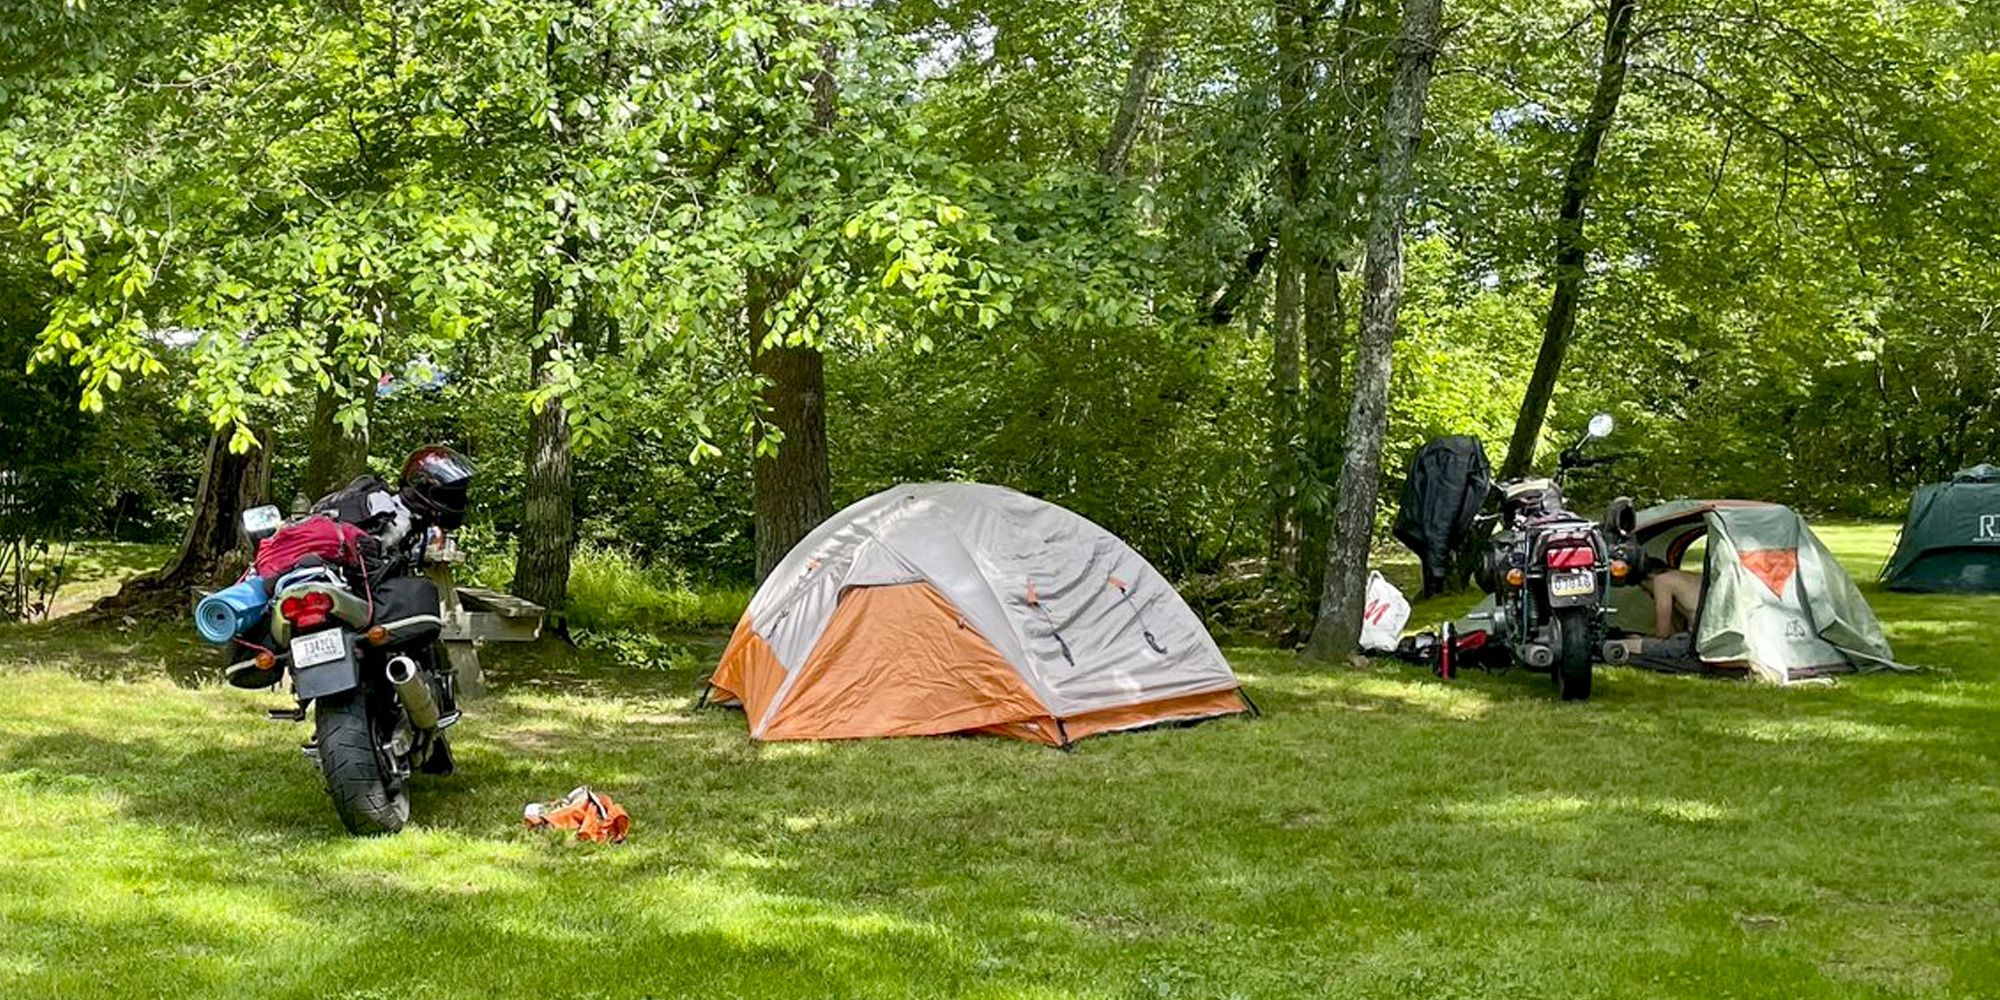 <p>There’s something just plain wonderful about the combination of camping and motorcycles. The common thread is freedom—there are some places out there that just can’t be reached via four wheels, and those places tend to be just a little short on valet parking or penthouse suites.</p><p>If you’re one of the many riders who made the switch from sportbikes or cruisers to “adventure bikes” in the past few years, you might be wondering how to get more adventure out of your bike – in which case camping is <em>definitely </em>for you. Or you could be one of those retro riders who delights in crossing the country via cafe racer or a restored vintage air-cooled standard bike, stopping for evenings under the stars and the kind of vistas you can’t see in a parking lot. Either way, you’ll want the right gear. Camping on a bike means being intentional about your choices, because bulk is your mortal enemy and weight only slows the ride. With that in mind, we’ve chosen some of the best ways to make the most of your rambles, both on and off-road.</p><h2 class="body-h2">Best Motorcycle Camping Gear</h2><ul><li><strong>Best Affordable Tent With Bike Cover: </strong><a href="https://www.amazon.com/dp/B08T91ZWJG?linkCode=ogi&tag=syndication-20&ascsubtag=%5Bartid%7C10060.g.42760020%5Bsrc%7Cmsn-us">Wolf Walker 2-Person Motorcycle Tent</a></li><li><strong>Best Affordable Two-Person Tent: </strong><a href="https://www.amazon.com/dp/B084LLQ14Q?tag=syndication-20&ascsubtag=%5Bartid%7C10060.g.42760020%5Bsrc%7Cmsn-us">Klymit Cross Canyon</a></li><li><strong>Best Budget One-Person Tent: </strong><a href="https://www.amazon.com/Clostnature-1-Person-Tent-Backpacking-Ultralight/dp/B0893QB42Z/ref=sr_1_5?keywords=one%2Bperson%2Btent&sr=8-5&th=1&tag=syndication-20&ascsubtag=%5Bartid%7C10060.g.42760020%5Bsrc%7Cmsn-us">Clostnature 1-Person Tent</a></li><li><strong>Best Boutique Lightweight Cooking Gear: </strong><a href="https://www.amazon.com/dp/B000AR2N7Q?linkCode=ogi&tag=syndication-20&ascsubtag=%5Bartid%7C10060.g.42760020%5Bsrc%7Cmsn-us">Snow Peak Trek 700 Pot</a></li><li><strong>Best Camping Chair: </strong><a href="https://www.amazon.com/dp/B09Q7QSXH5?linkCode=ogi&tag=syndication-20&ascsubtag=%5Bartid%7C10060.g.42760020%5Bsrc%7Cmsn-us">CLIQ Folding Chair</a></li></ul><blockquote class="body-blockquote"><strong>The Expert: </strong>I’ve been riding motorcycles for twenty-nine years, everywhere from Seattle to Fort Lauderdale, and I’m always searching for ways to extend and enhance the experience. Along the way, I’ve written about cars and motorcycles for Esquire, Road & Track, and Car & Driver, among others. As a rule, I don’t enjoy camping, so if I’m going to skip the hotel I need to be certain that I won’t be tossing and turning all night.</blockquote><h2 class="body-h2">How to Pick Great Motorcycle Camping Gear</h2><p>When prepping for a long camping trip, it’s tempting to start with what’s compatible with your bike. First and foremost, however, it has to work for you<em>. </em>That means choosing a sleeping bag that’s warm enough for the coldest weather you might see, a tent that’s big and comfortable so you can get a good night’s sleep, and the right cooking gear to make what’s on your campfire menu. It has to meet your needs, and <em>then </em>it has to fit. Don’t be ashamed to try everything at home extensively before taking it on the road.</p><h3 class="body-h3">What Kind of Camping Gear Works Best For a Long-Distance Ride?</h3><p>The traditional minimum loadout for camping bikers is a rolled sleeping bag and a small cooking kit. It’s enough to get you through fair-weather nights, but anything more severe than that will be unpleasant. The next logical step, if you can fit it, would be a small collapsible tent, which will keep the weather off you.</p><p>Still have room? A larger tent with a motorcycle shelter makes mornings more pleasant, and an <a href="https://www.popularmechanics.com/home/g37022927/best-air-mattress/">air mattress</a> can make camping on rough ground tolerable for people with back problems or nagging injuries. Most riders will use any extra space they have after <em>that </em>for a broader variety of clothes, but it’s also worthwhile to add a propane or Sterno stove to improve your camping cuisine.</p><h3 class="body-h3">Your Bike Is Your Backpack</h3><p>Before you make any plans to go camping with your motorcycle or buy gear for the trip, it’s critical to really understand what will actually fit on your bike. Take the time to measure all the available storage.</p><p>A new BMW GS with extra-large Jesse boxes will have a lot more room than a retro rider on a slick-side Seventies Honda. Also, very few saddlebags or top boxes are precisely square, so learn where the “pinch points” are.</p><p>Once you know how much storage you have, remember that you should only use about half to three-quarters of that space for your camping gear. It’s easy to forget that you’ll need a little extra space for a few personal effects, supplies, and any souvenirs you pick up along the way.</p><p>Get your “packout” together–all the things you’re taking on the ride, including clothes and tools–and try putting it all in the bike until it’s second nature. If you can’t do it easily in your own driveway on a sunny day, you won’t be able to do it before sunrise in the rain. Don’t expect things to get easier once you're on the road, because they won’t.</p><p>Finally, if you’re using a traditional rear-seat bedroll-and-stack, like the bike campers of yore, you should also go on a few test rides around your area at freeway speeds to ensure that your setup doesn’t slip, slide, or just plain disappear from the bike. Better to find out the bad news when you’re close to home.</p><h3 class="body-h3">Adjust To Your Trip</h3><p>A little intelligent consideration of your planned trip will go a long way towards ensuring the best experience. The desert gets cold at night, which is something many Midwesterners (like your author) tend to forget until it’s too late. Both the Northeast and Pacific Northwest have unpredictable rain, something to consider when you’re choosing a tent. Pack for the length of your trip and the likely conditions along the way.</p><p>Preparing for the weather includes picking (and making room for) the right clothes. If you leave home with a full Aerostitch suit, heated gloves, and a neck gaiter, you will need to make sure and leave room to stow it when the weather gets warm. Don’t think you’ll just “stuff it in there,” because you won’t. It’s counterintuitive, but a <a href="https://www.popularmechanics.com/adventure/outdoor-gear/g43234721/best-motorcycle-jackets/">motorcycle jacket</a> is far bulkier than a tent.</p><h2 class="body-h2">How We Evaluated</h2><p>After years of motorcycle touring, I have an idea of what works and what doesn’t. In addition to my own personal testing, I reached out to riders who do ADV (adventure) touring and primitive camping to hear their stories and get expert feedback on the best choices for different motorcycles. We prioritized value and affordability, without sacrificing durability on the road. Preference was given to items that are light and compact. When possible, we chose soft-sided items over rigid ones, because most motorcycle luggage boxes are irregular and rigid items waste space.</p>